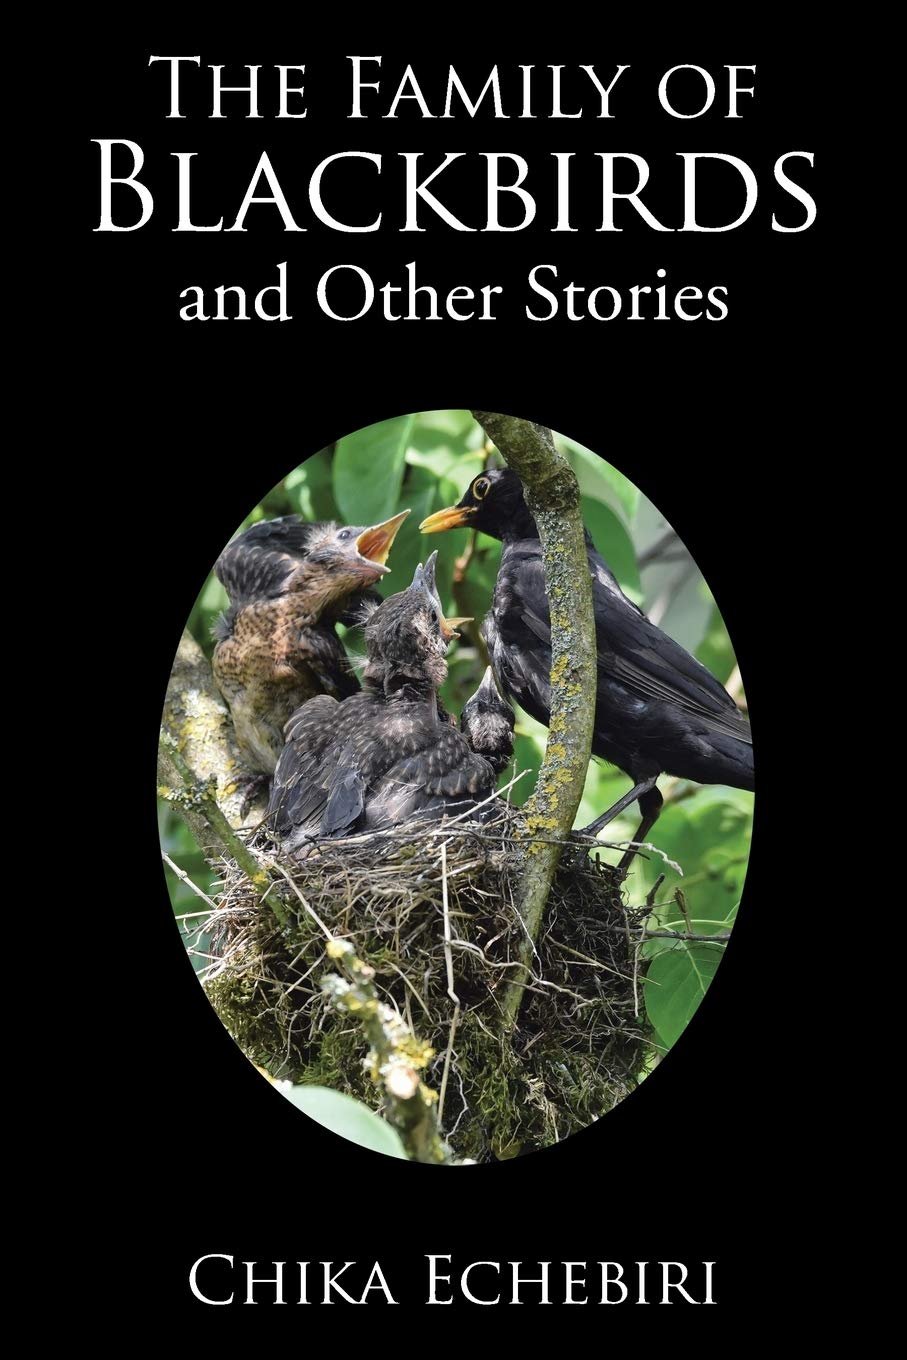 Chika Echebiri’s The Family of Blackbirds and Other Stories Promoted by Author’s Tranquility Press